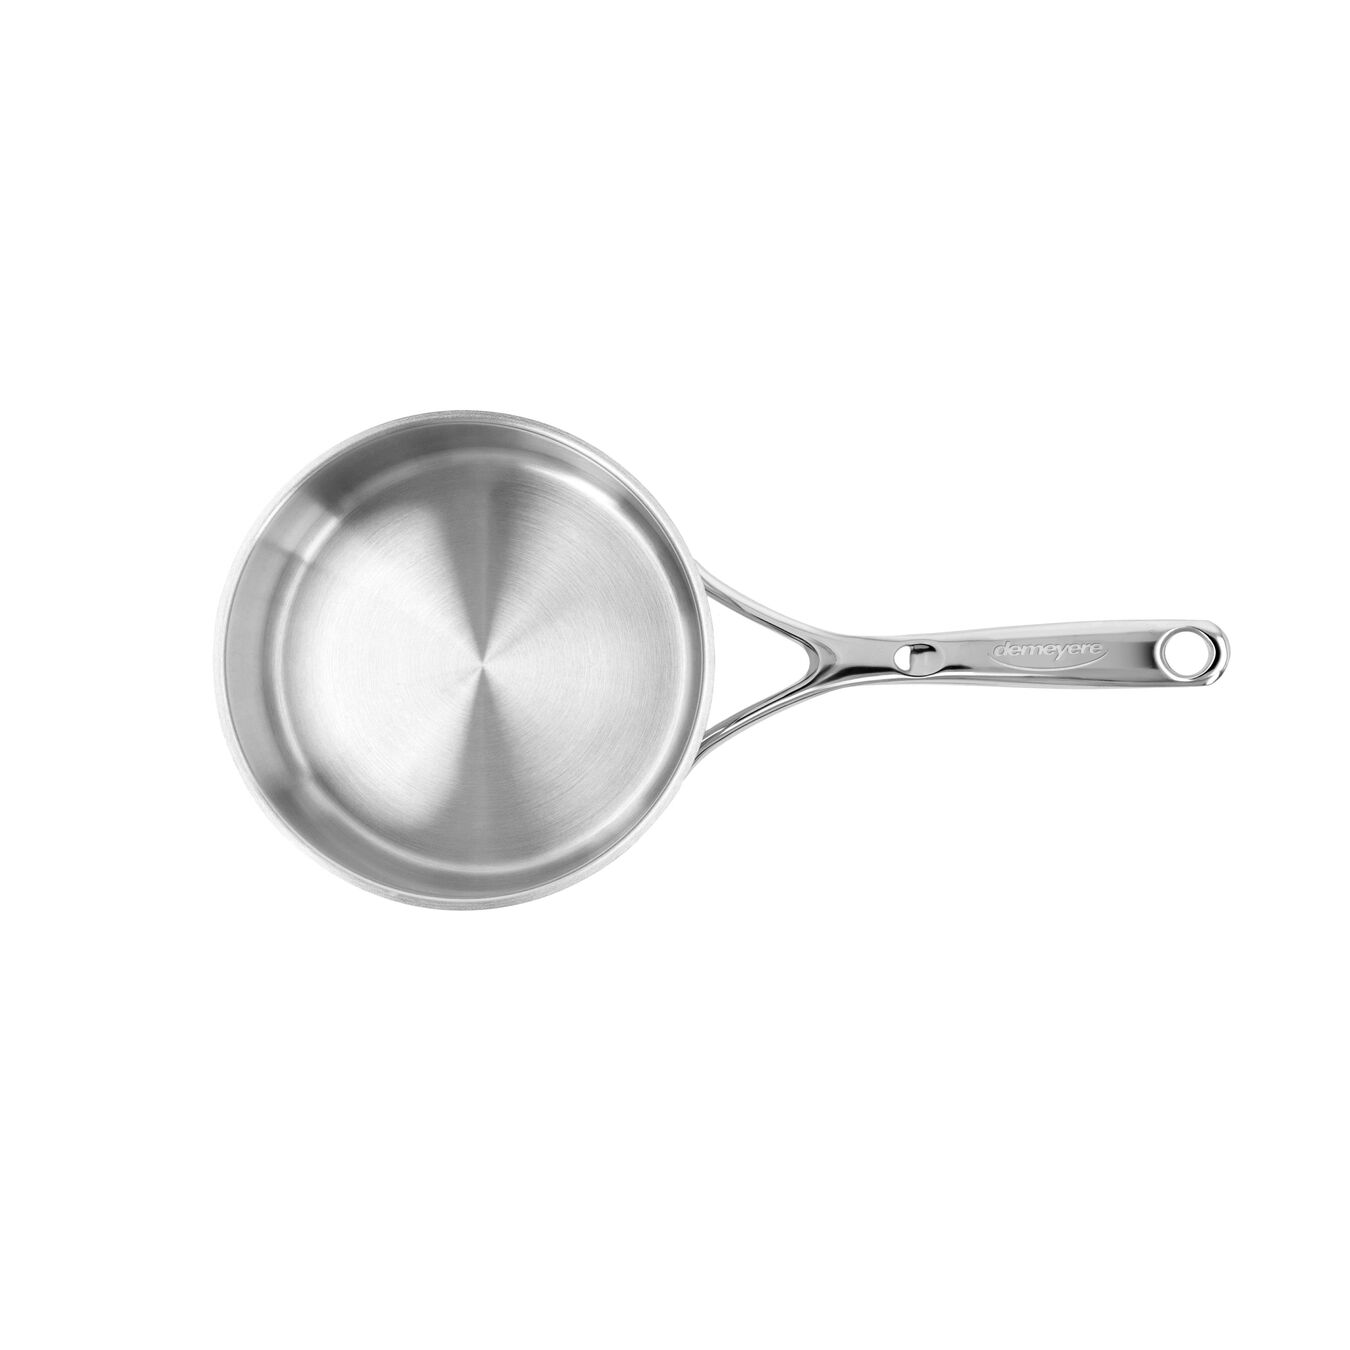 2.2 l 18/10 Stainless Steel round Sauce pan with lid, silver,,large 4